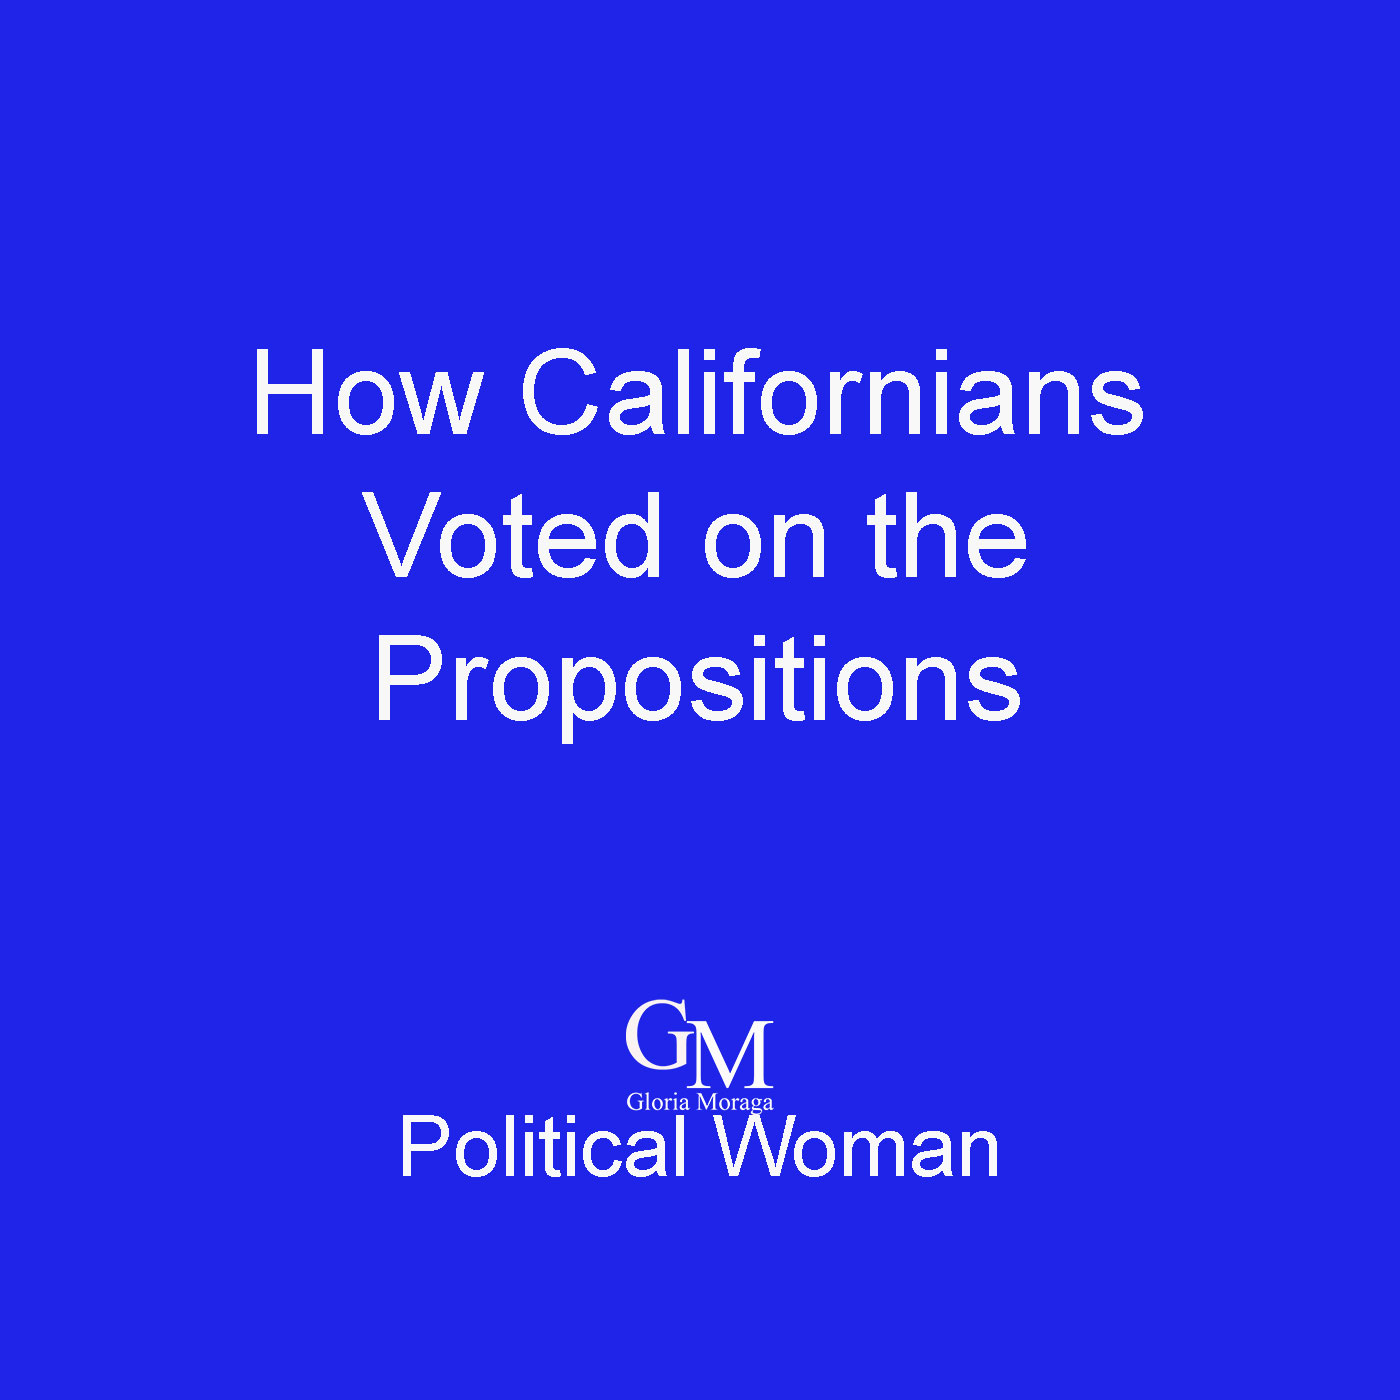 How Californians Voted on the Propositions